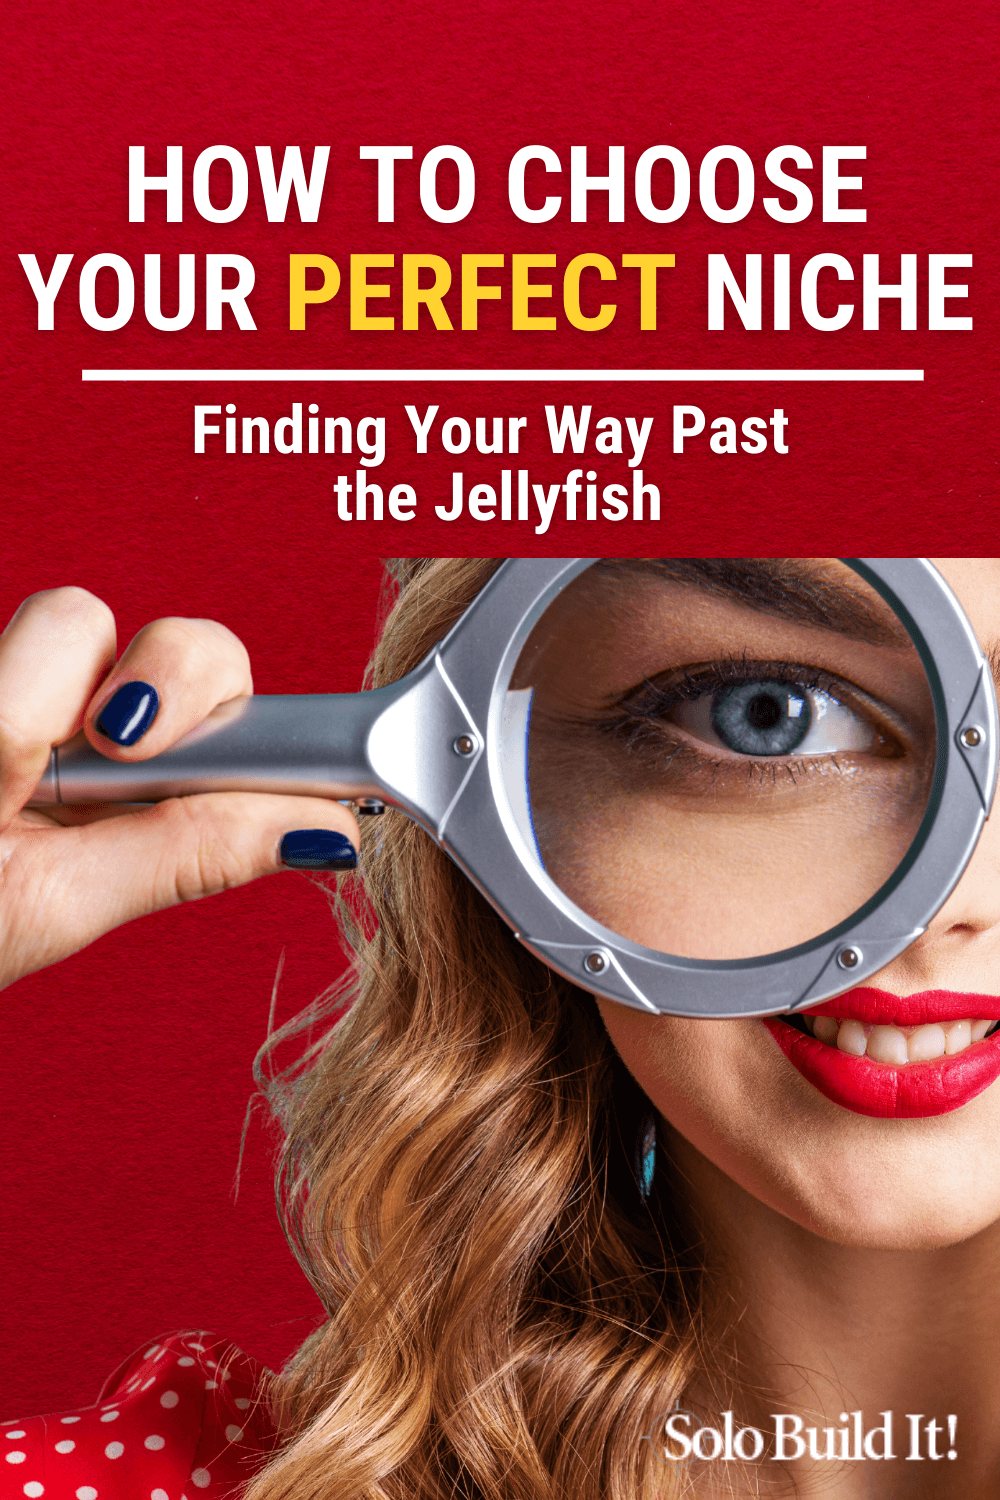 How to Choose a Niche in 3 Simple Steps